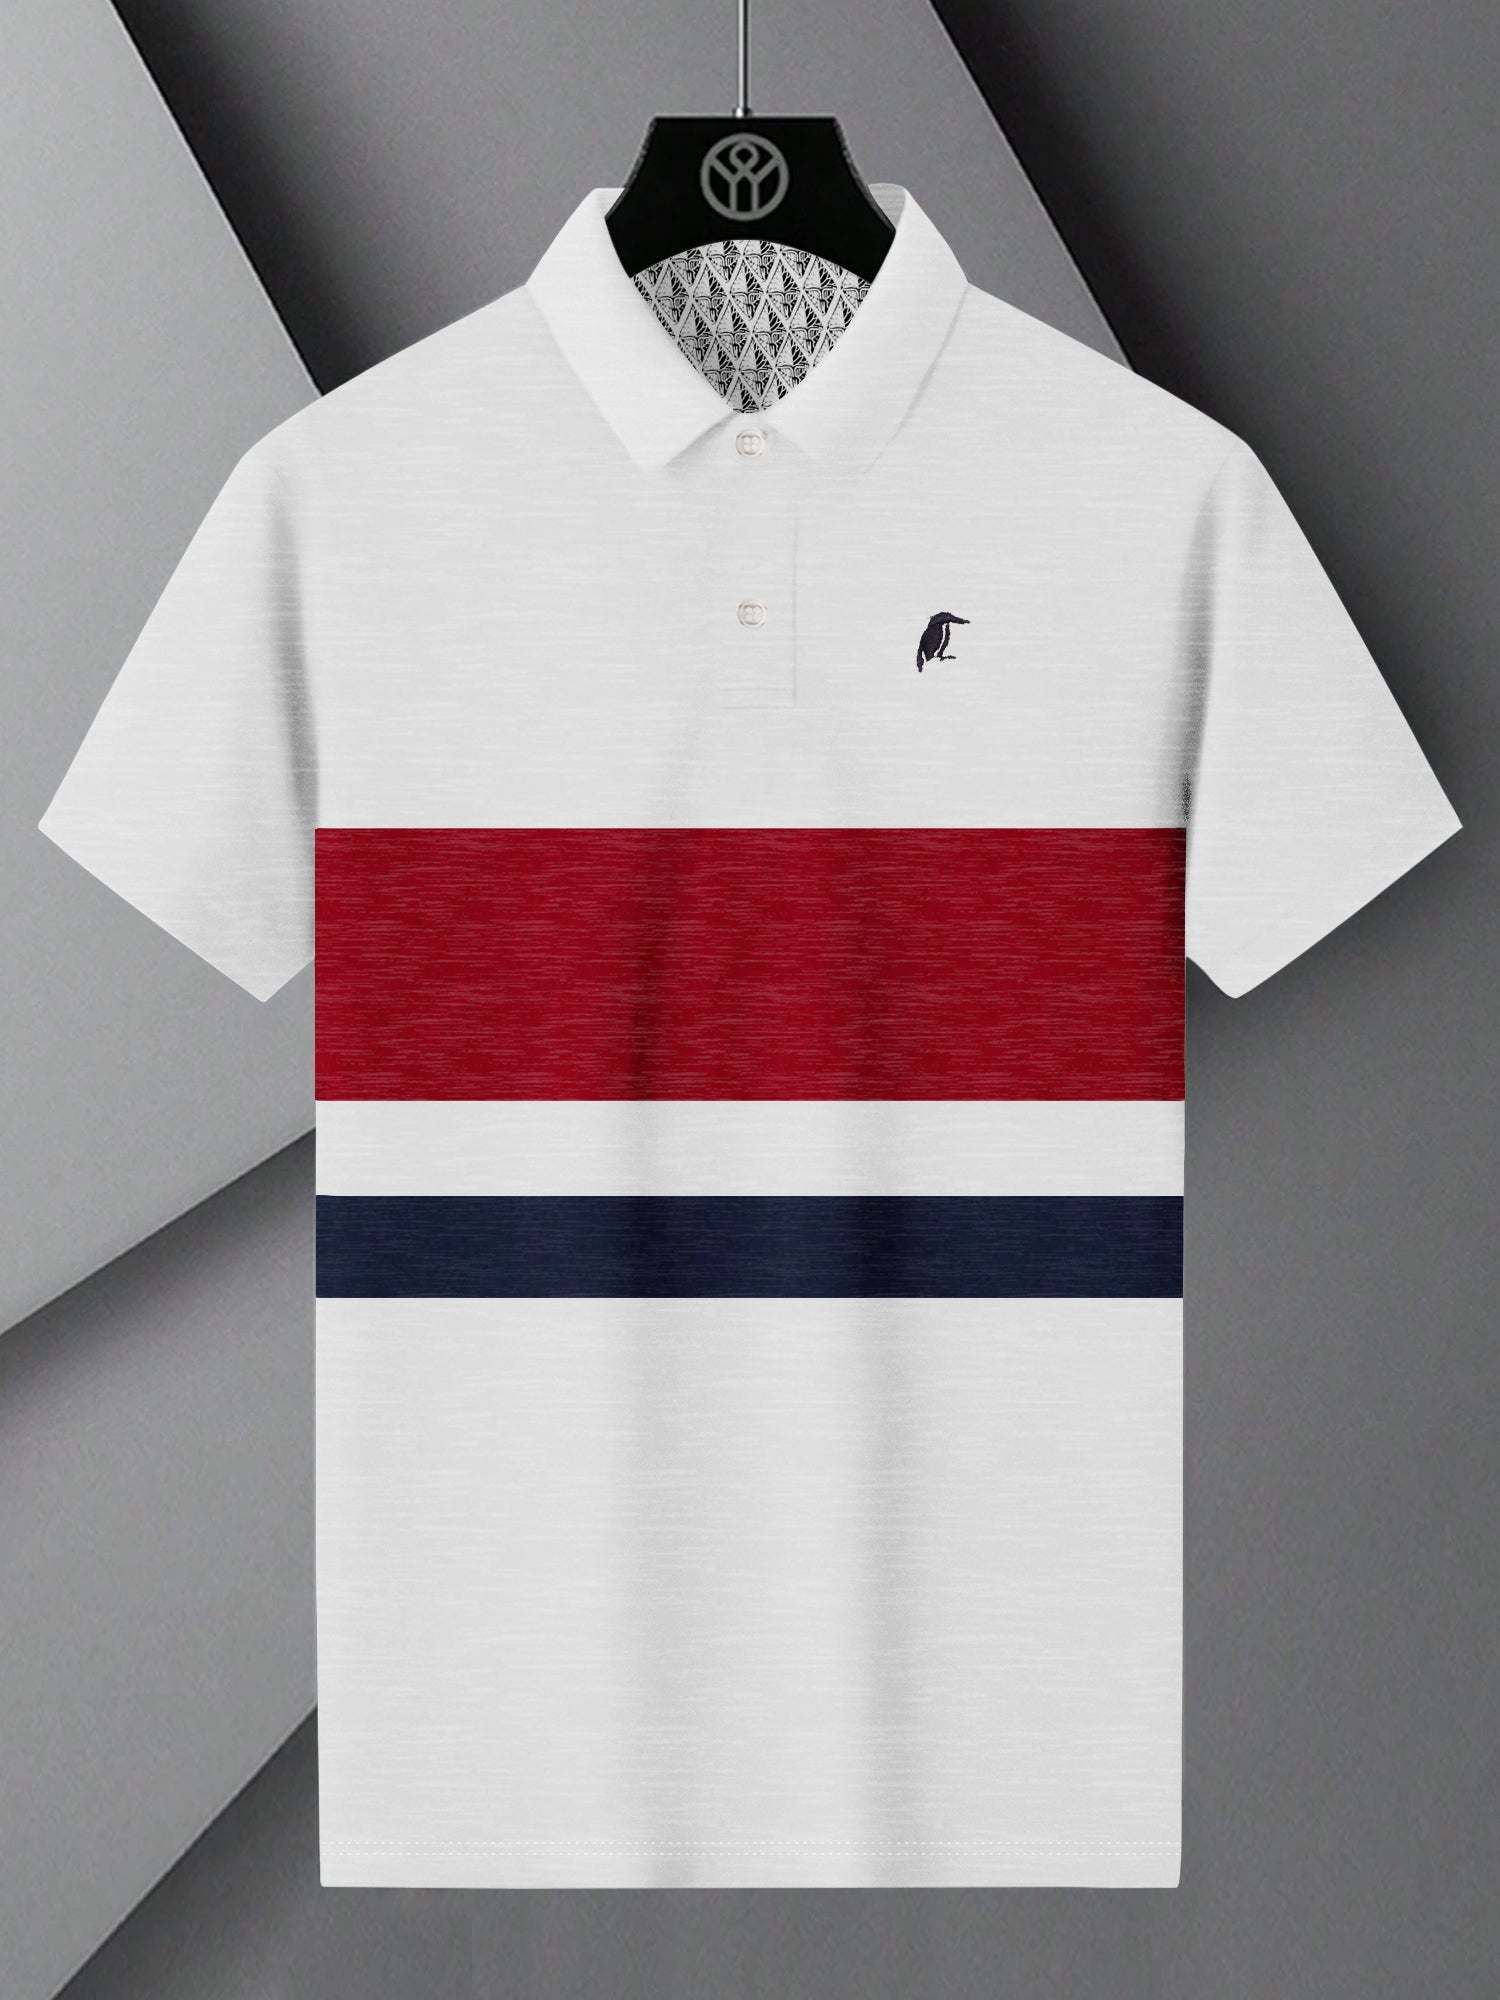 Cxly Half Sleeve Polo For Men-White with Red & Navy Panels-SP1613/RT2386